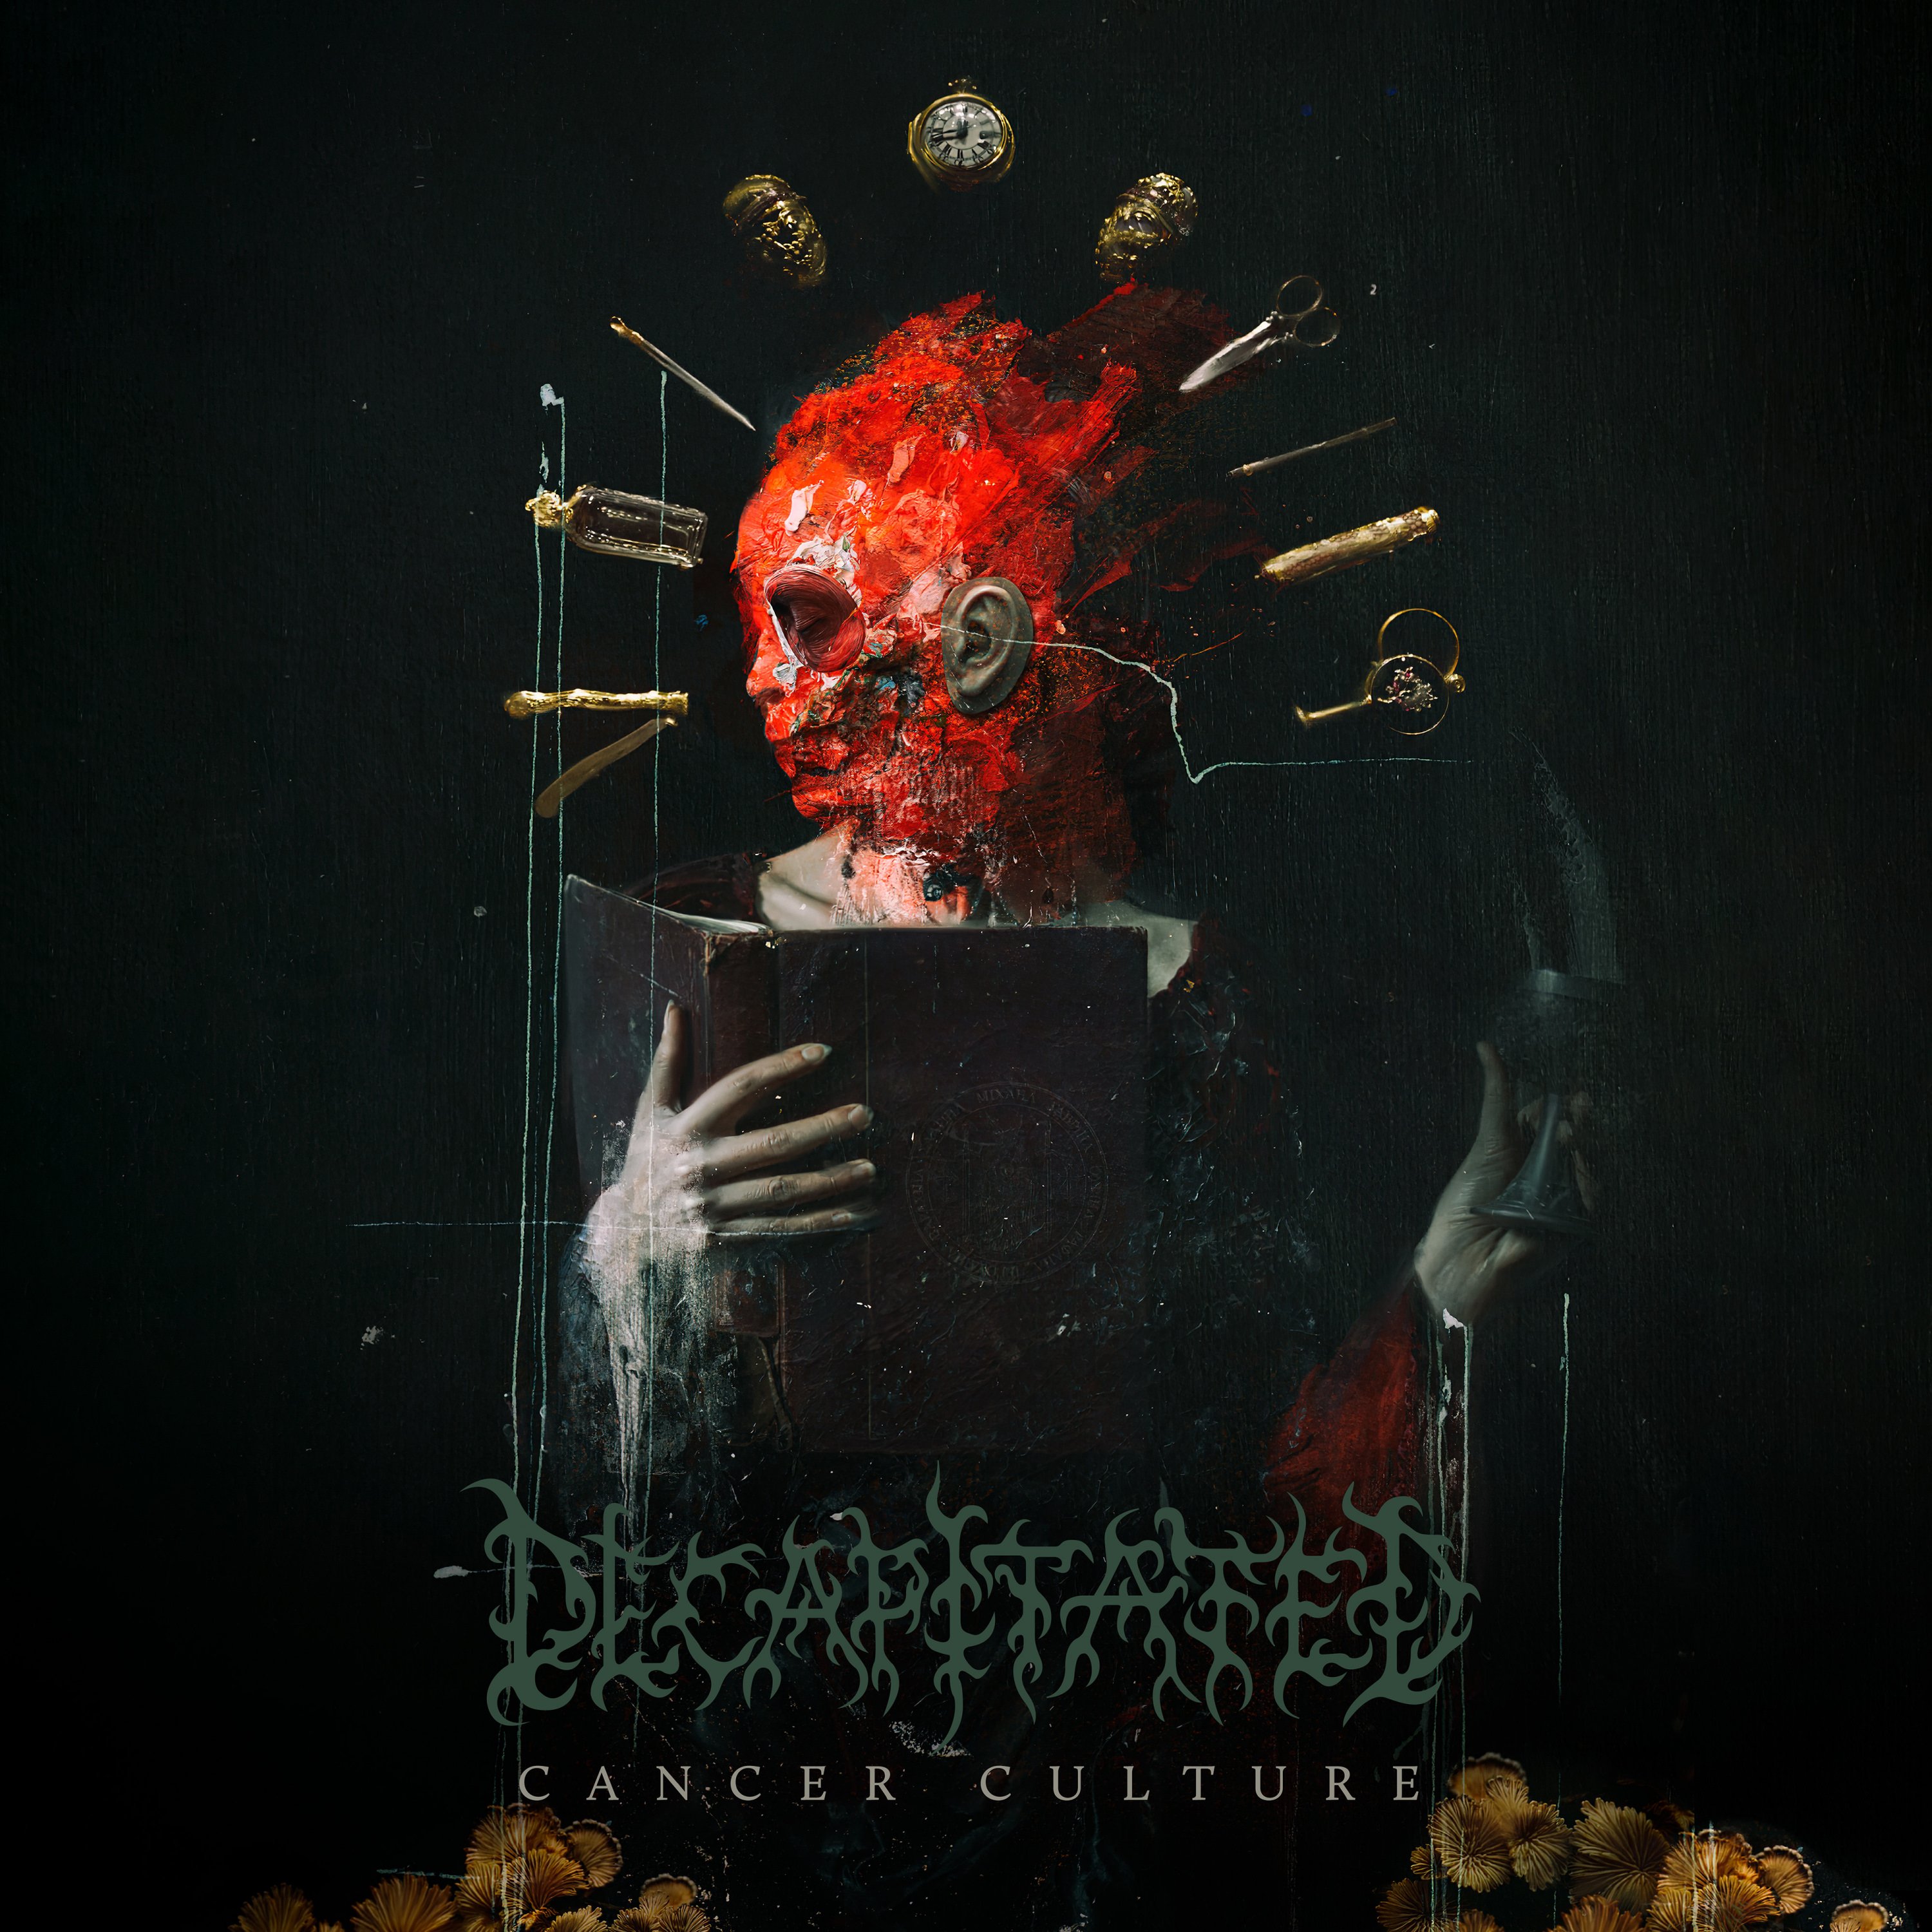 Decapitated-Cancer Culture-(NB 6052-2)-CD-FLAC-2022-WRE